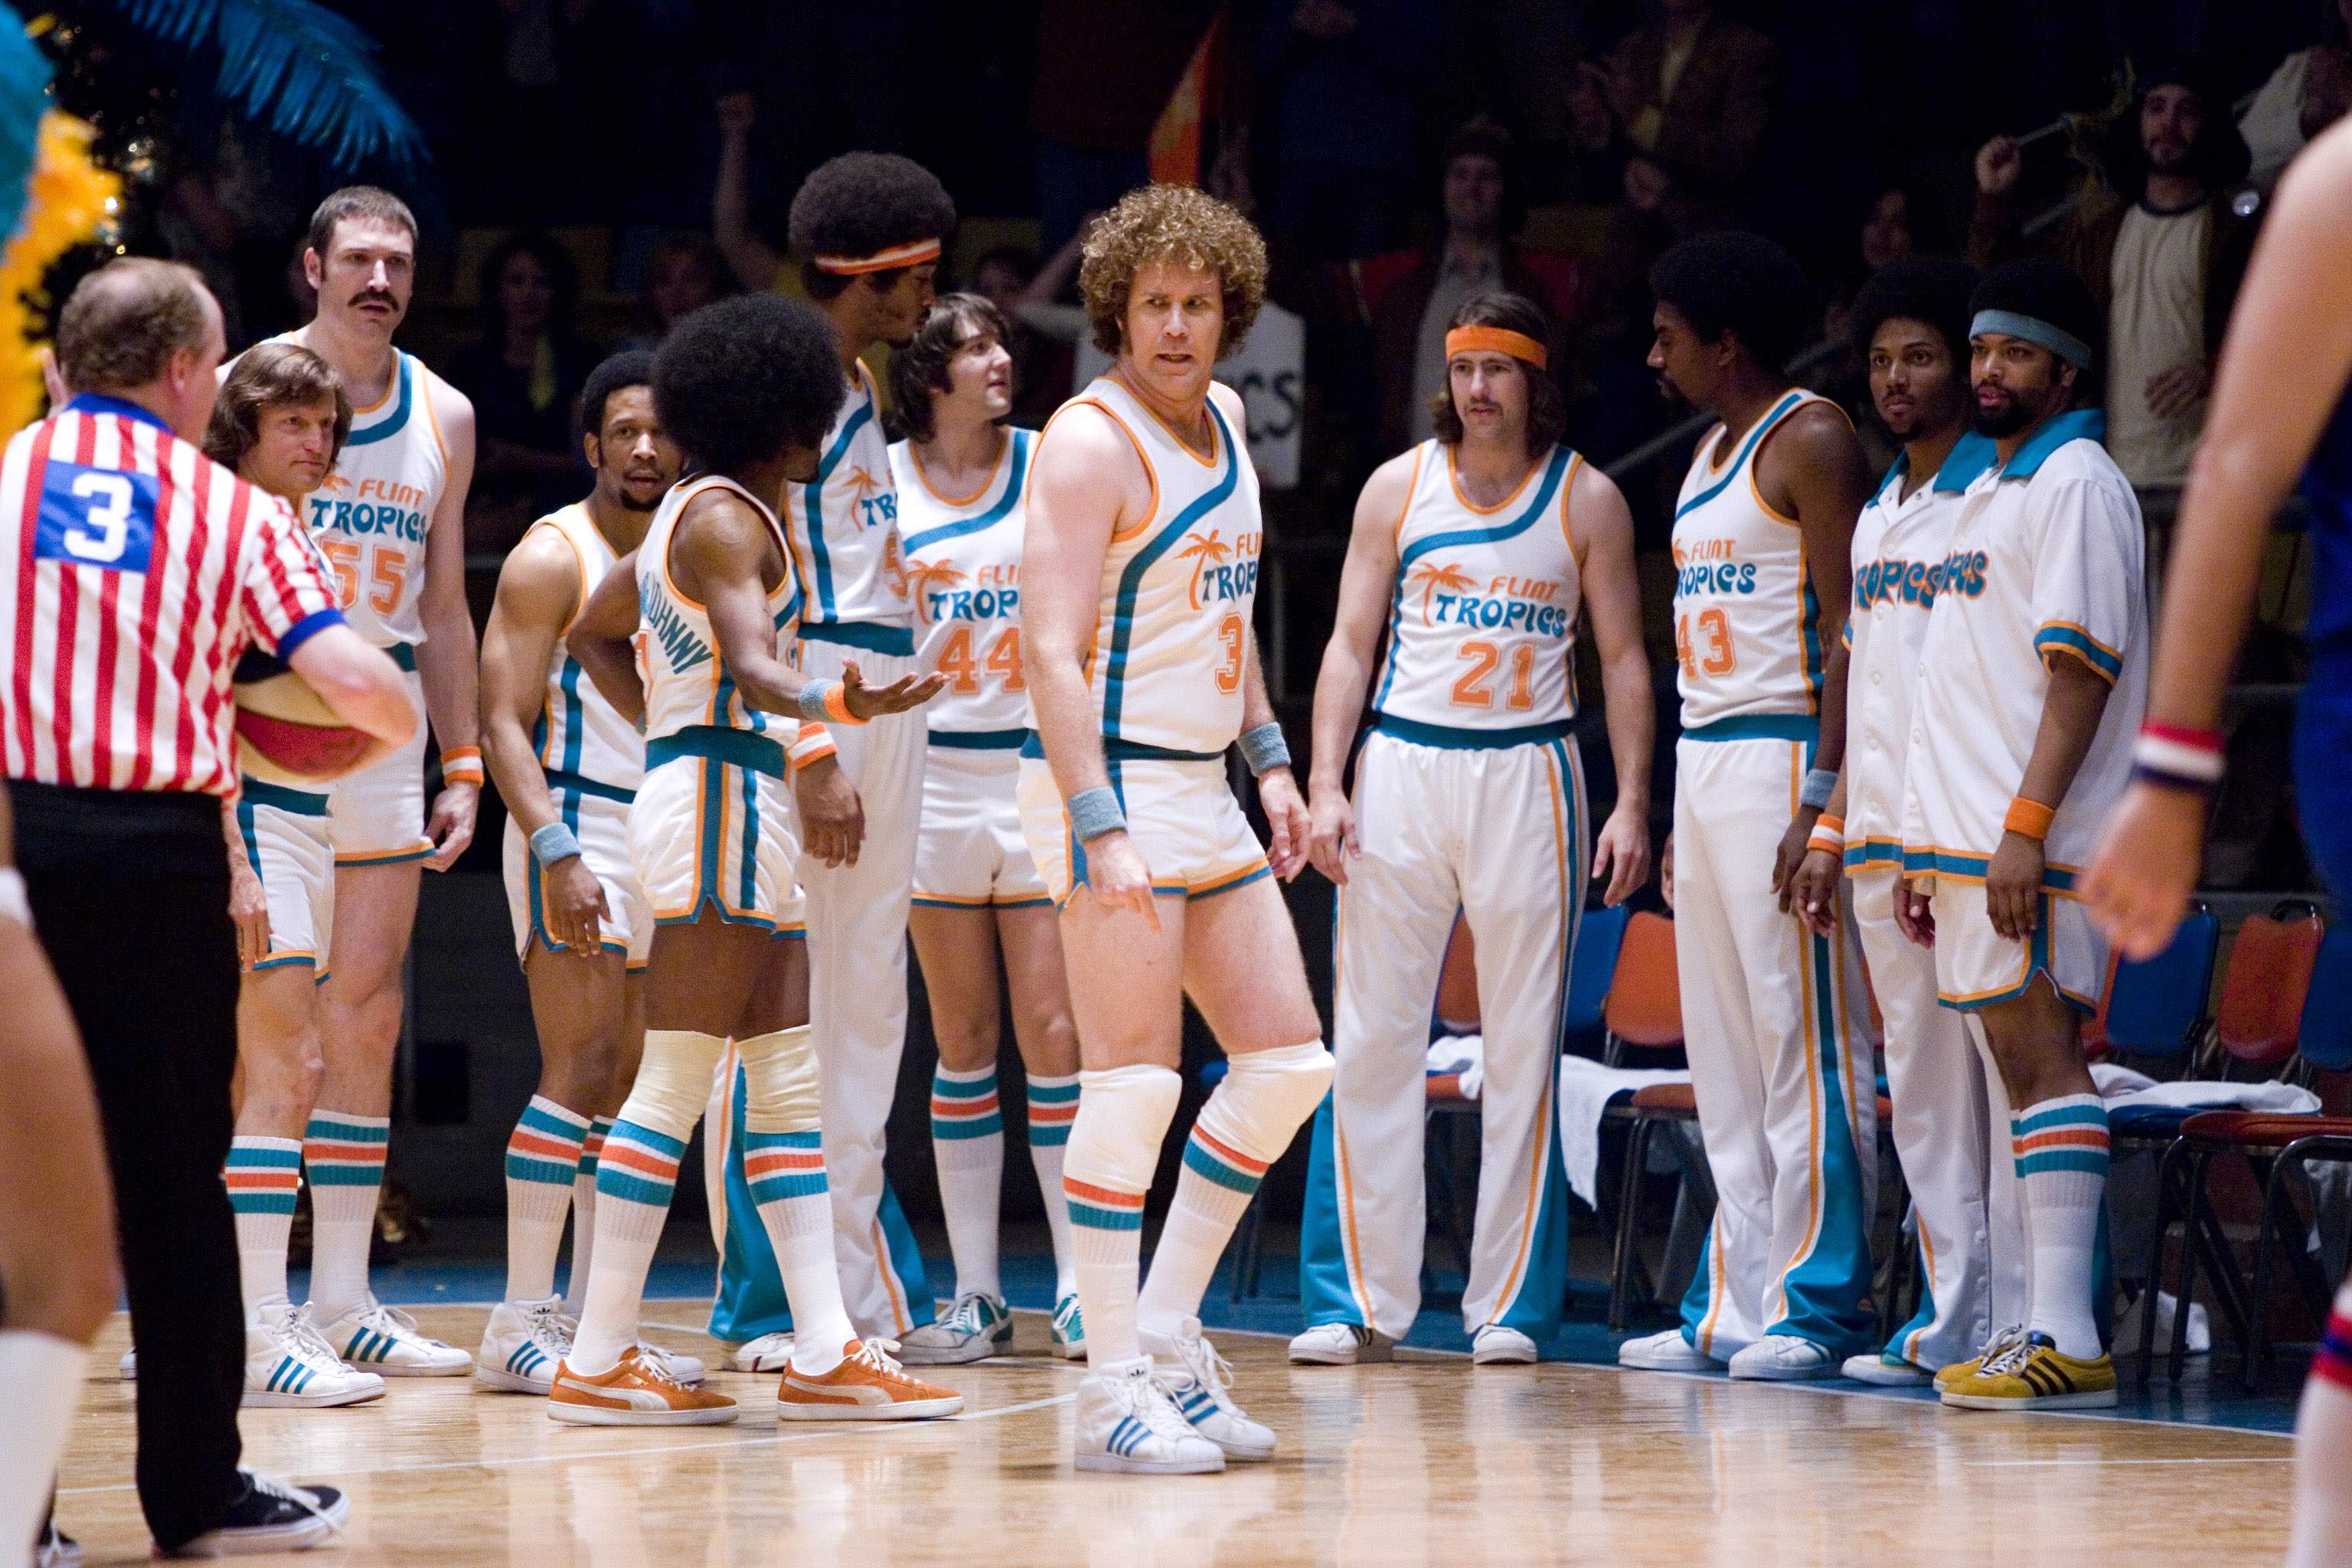 ESPN - Jackie Moon led the Flint Tropics on a memorable run 12 years ago as  they went from last to 4th-place in the ABA.